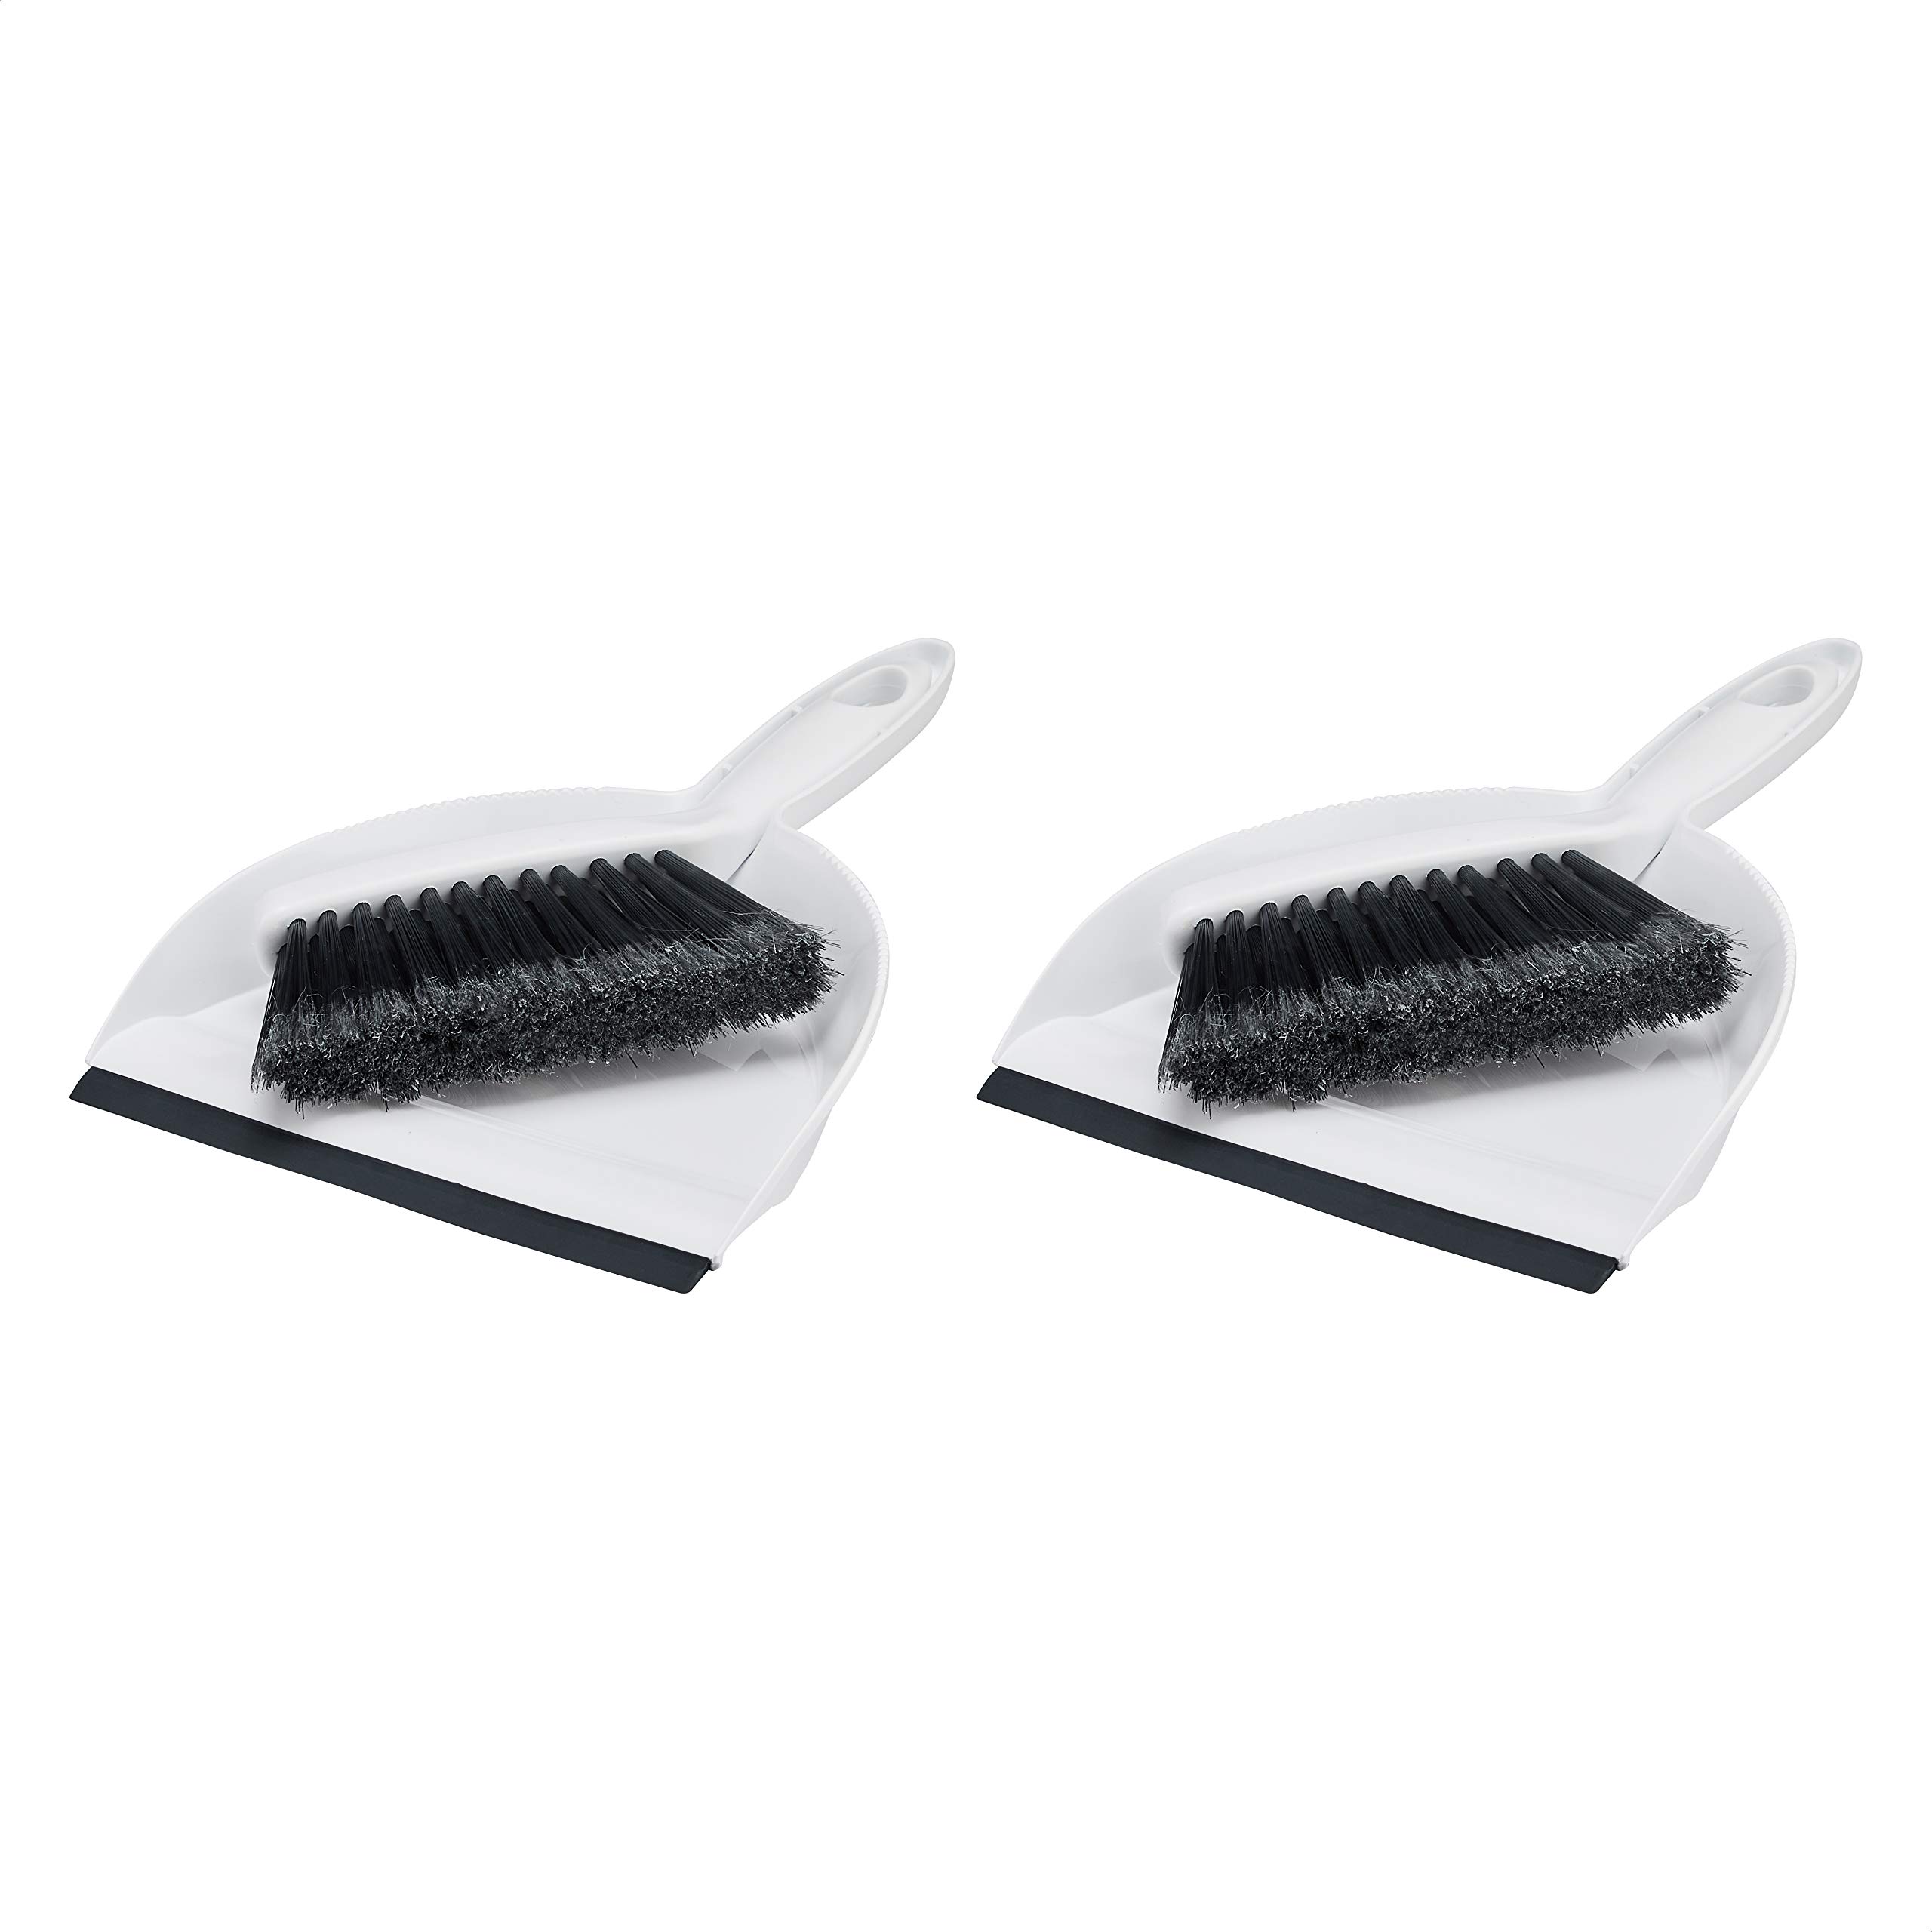 AmazonCommercial Mini Brush and Dustpan Set, Pack of 2, Gray